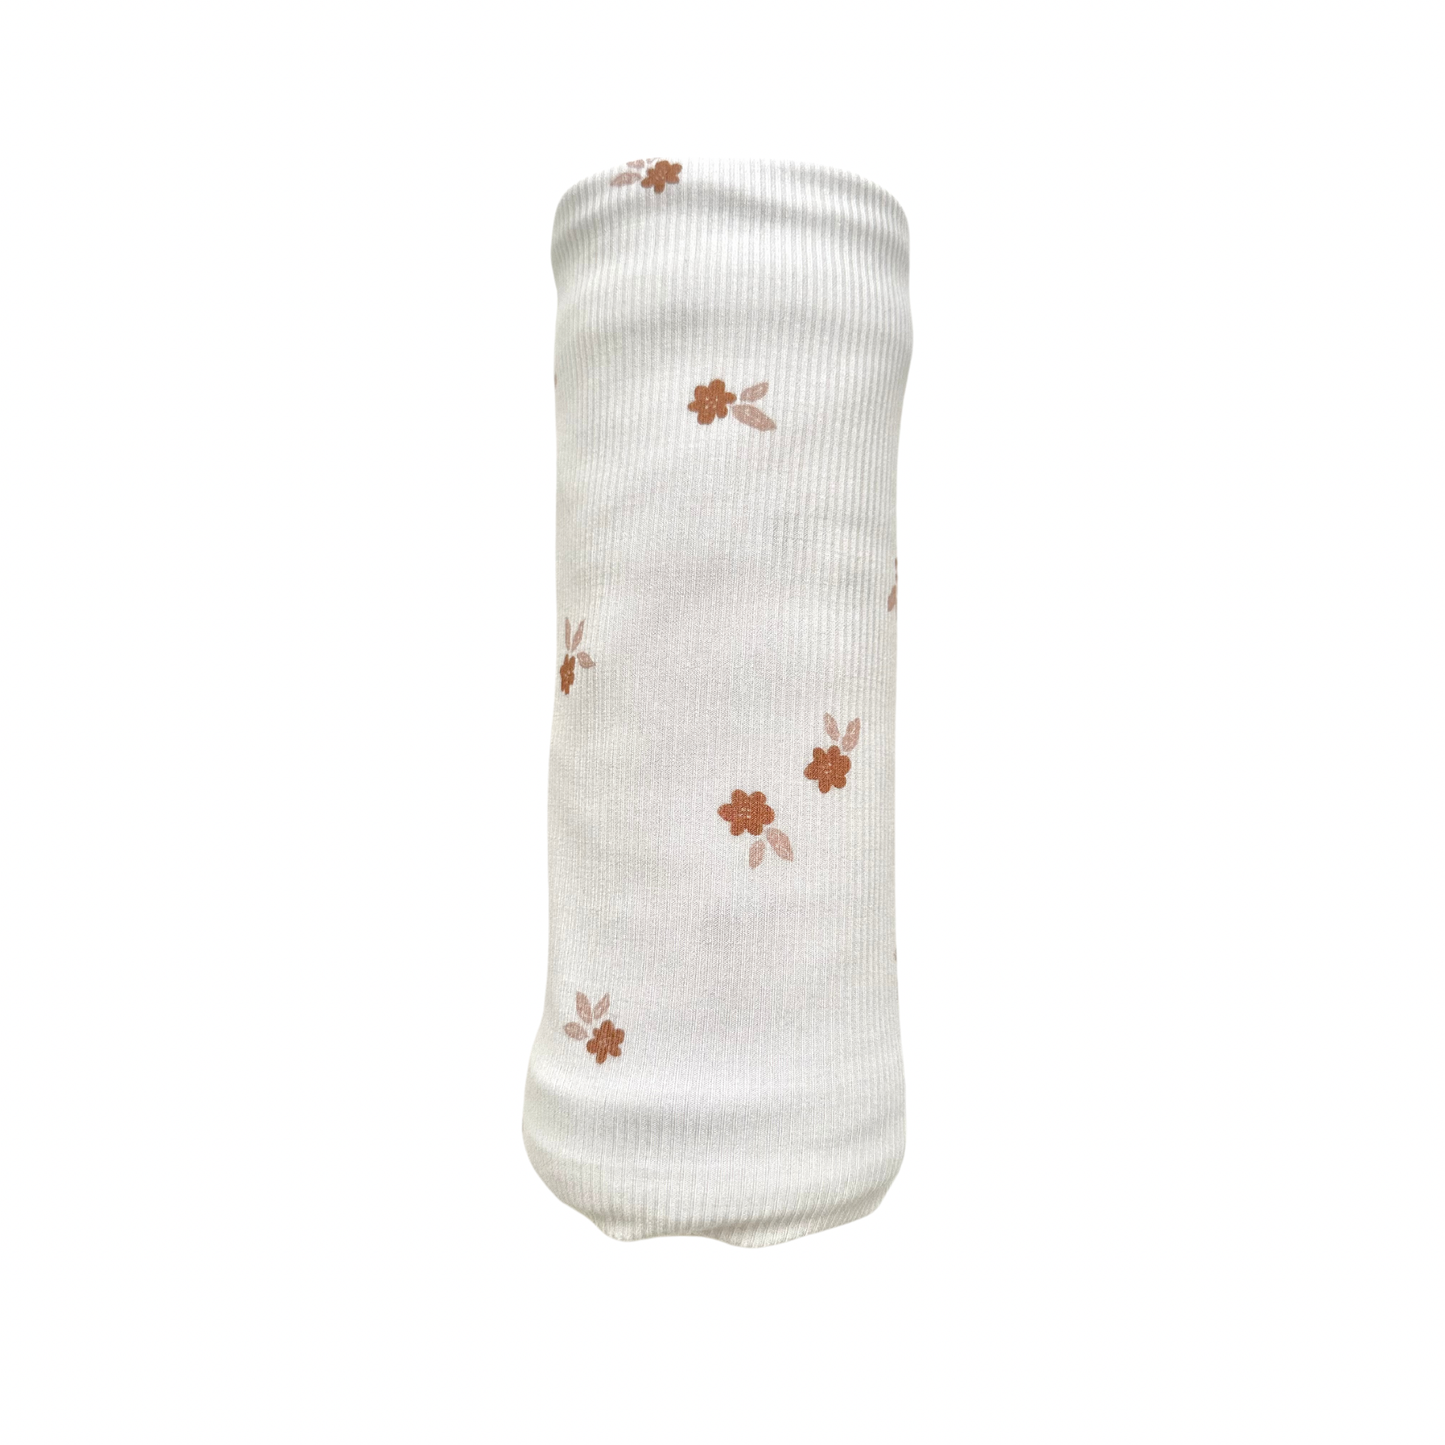 Bamboo Stretch Swaddle - Fleur: Swaddle + Bow Hat